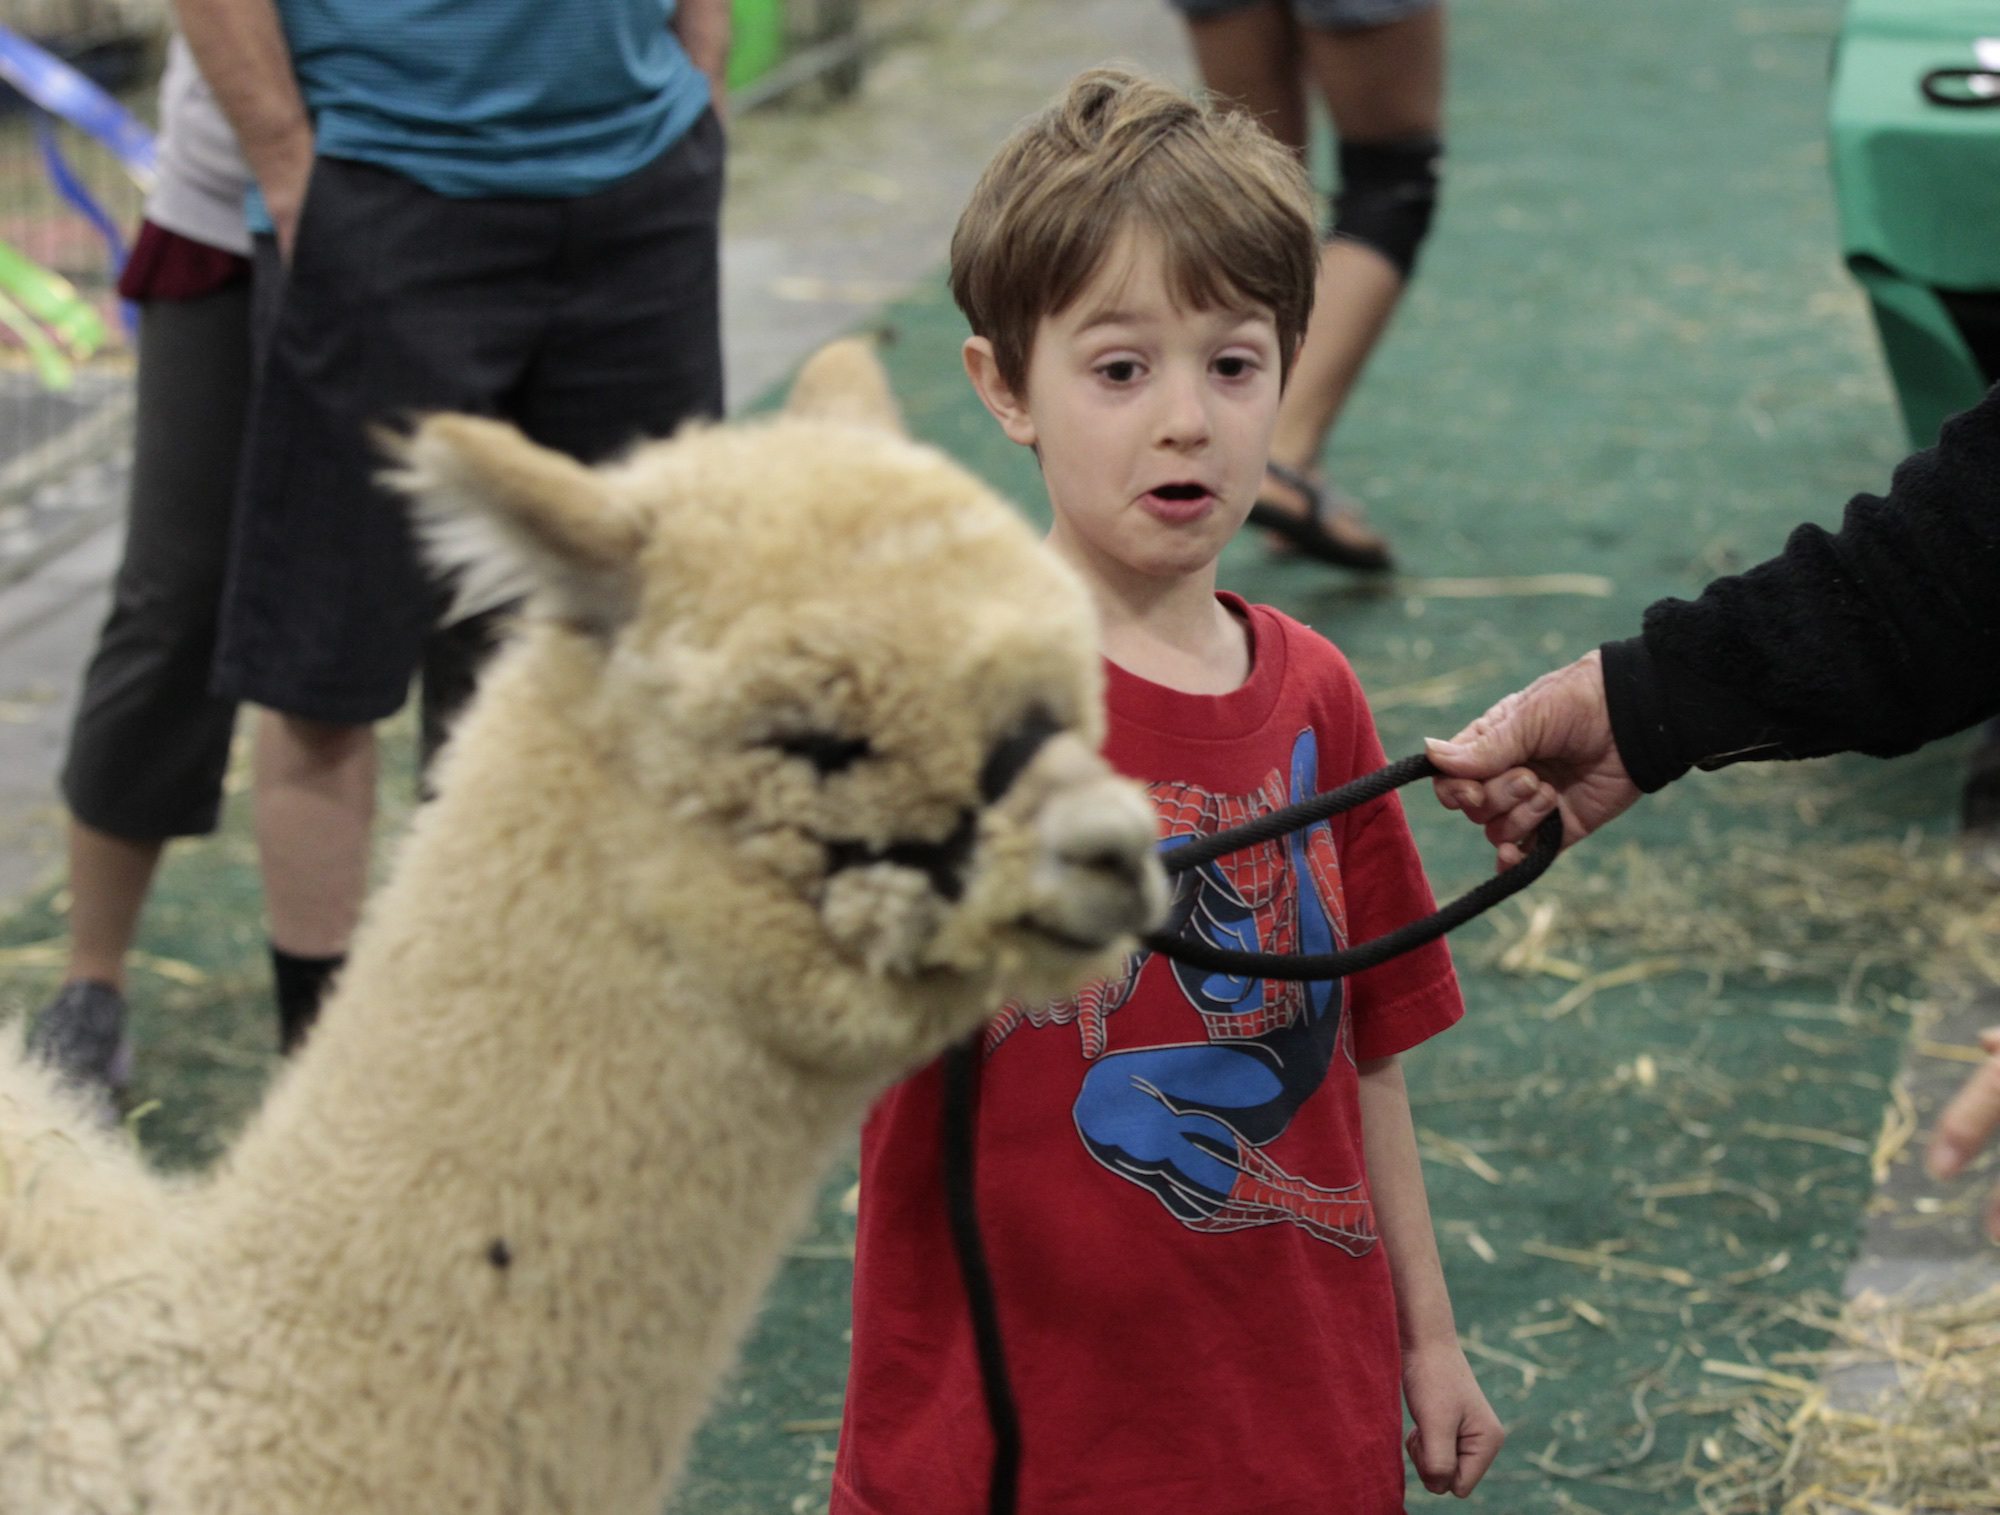 Waylon Doucet, 6, of Washougal pets an alpaca for the first time Saturday at Alpacapalooza, an annual showcase of the furry creatures. It continues today from 8:30 a.m. to 2 p.m. at the Clark County Event Center at the Fairgrounds.